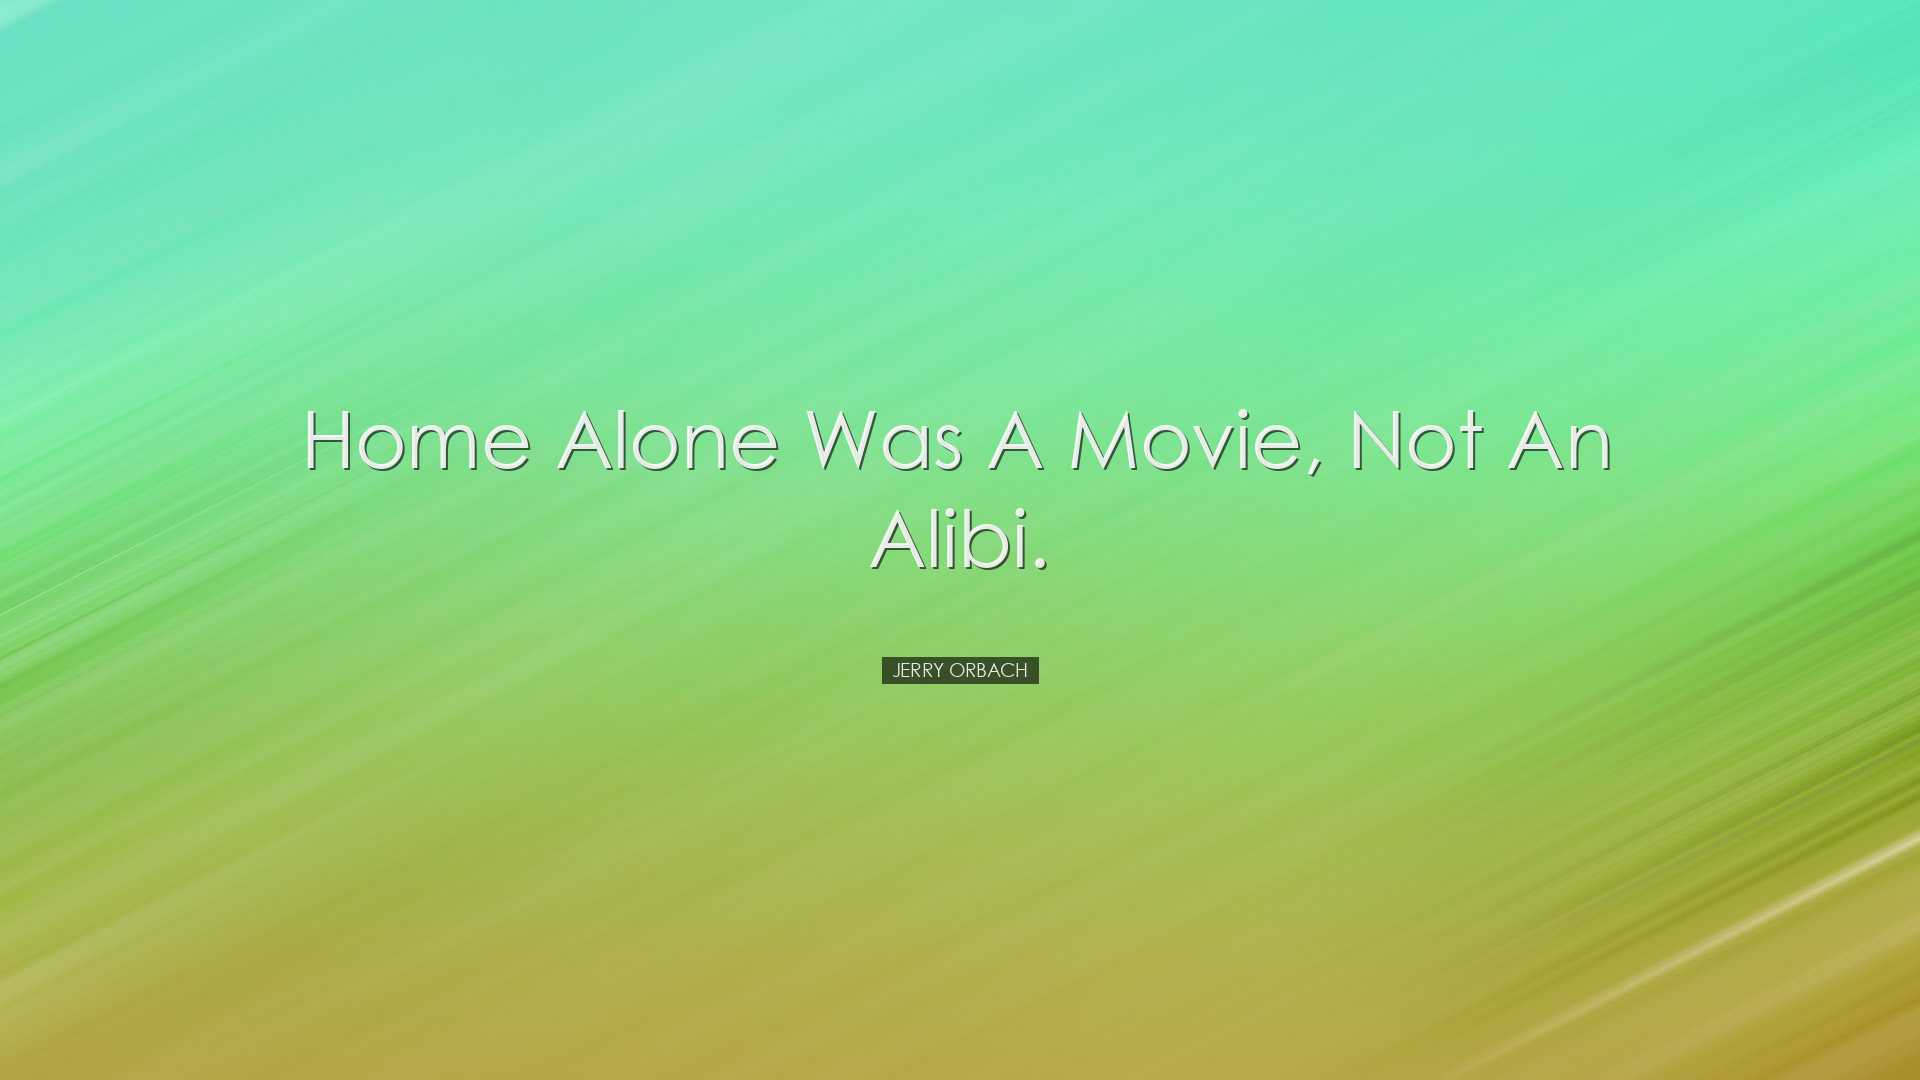 Home Alone was a movie, not an alibi. - Jerry Orbach